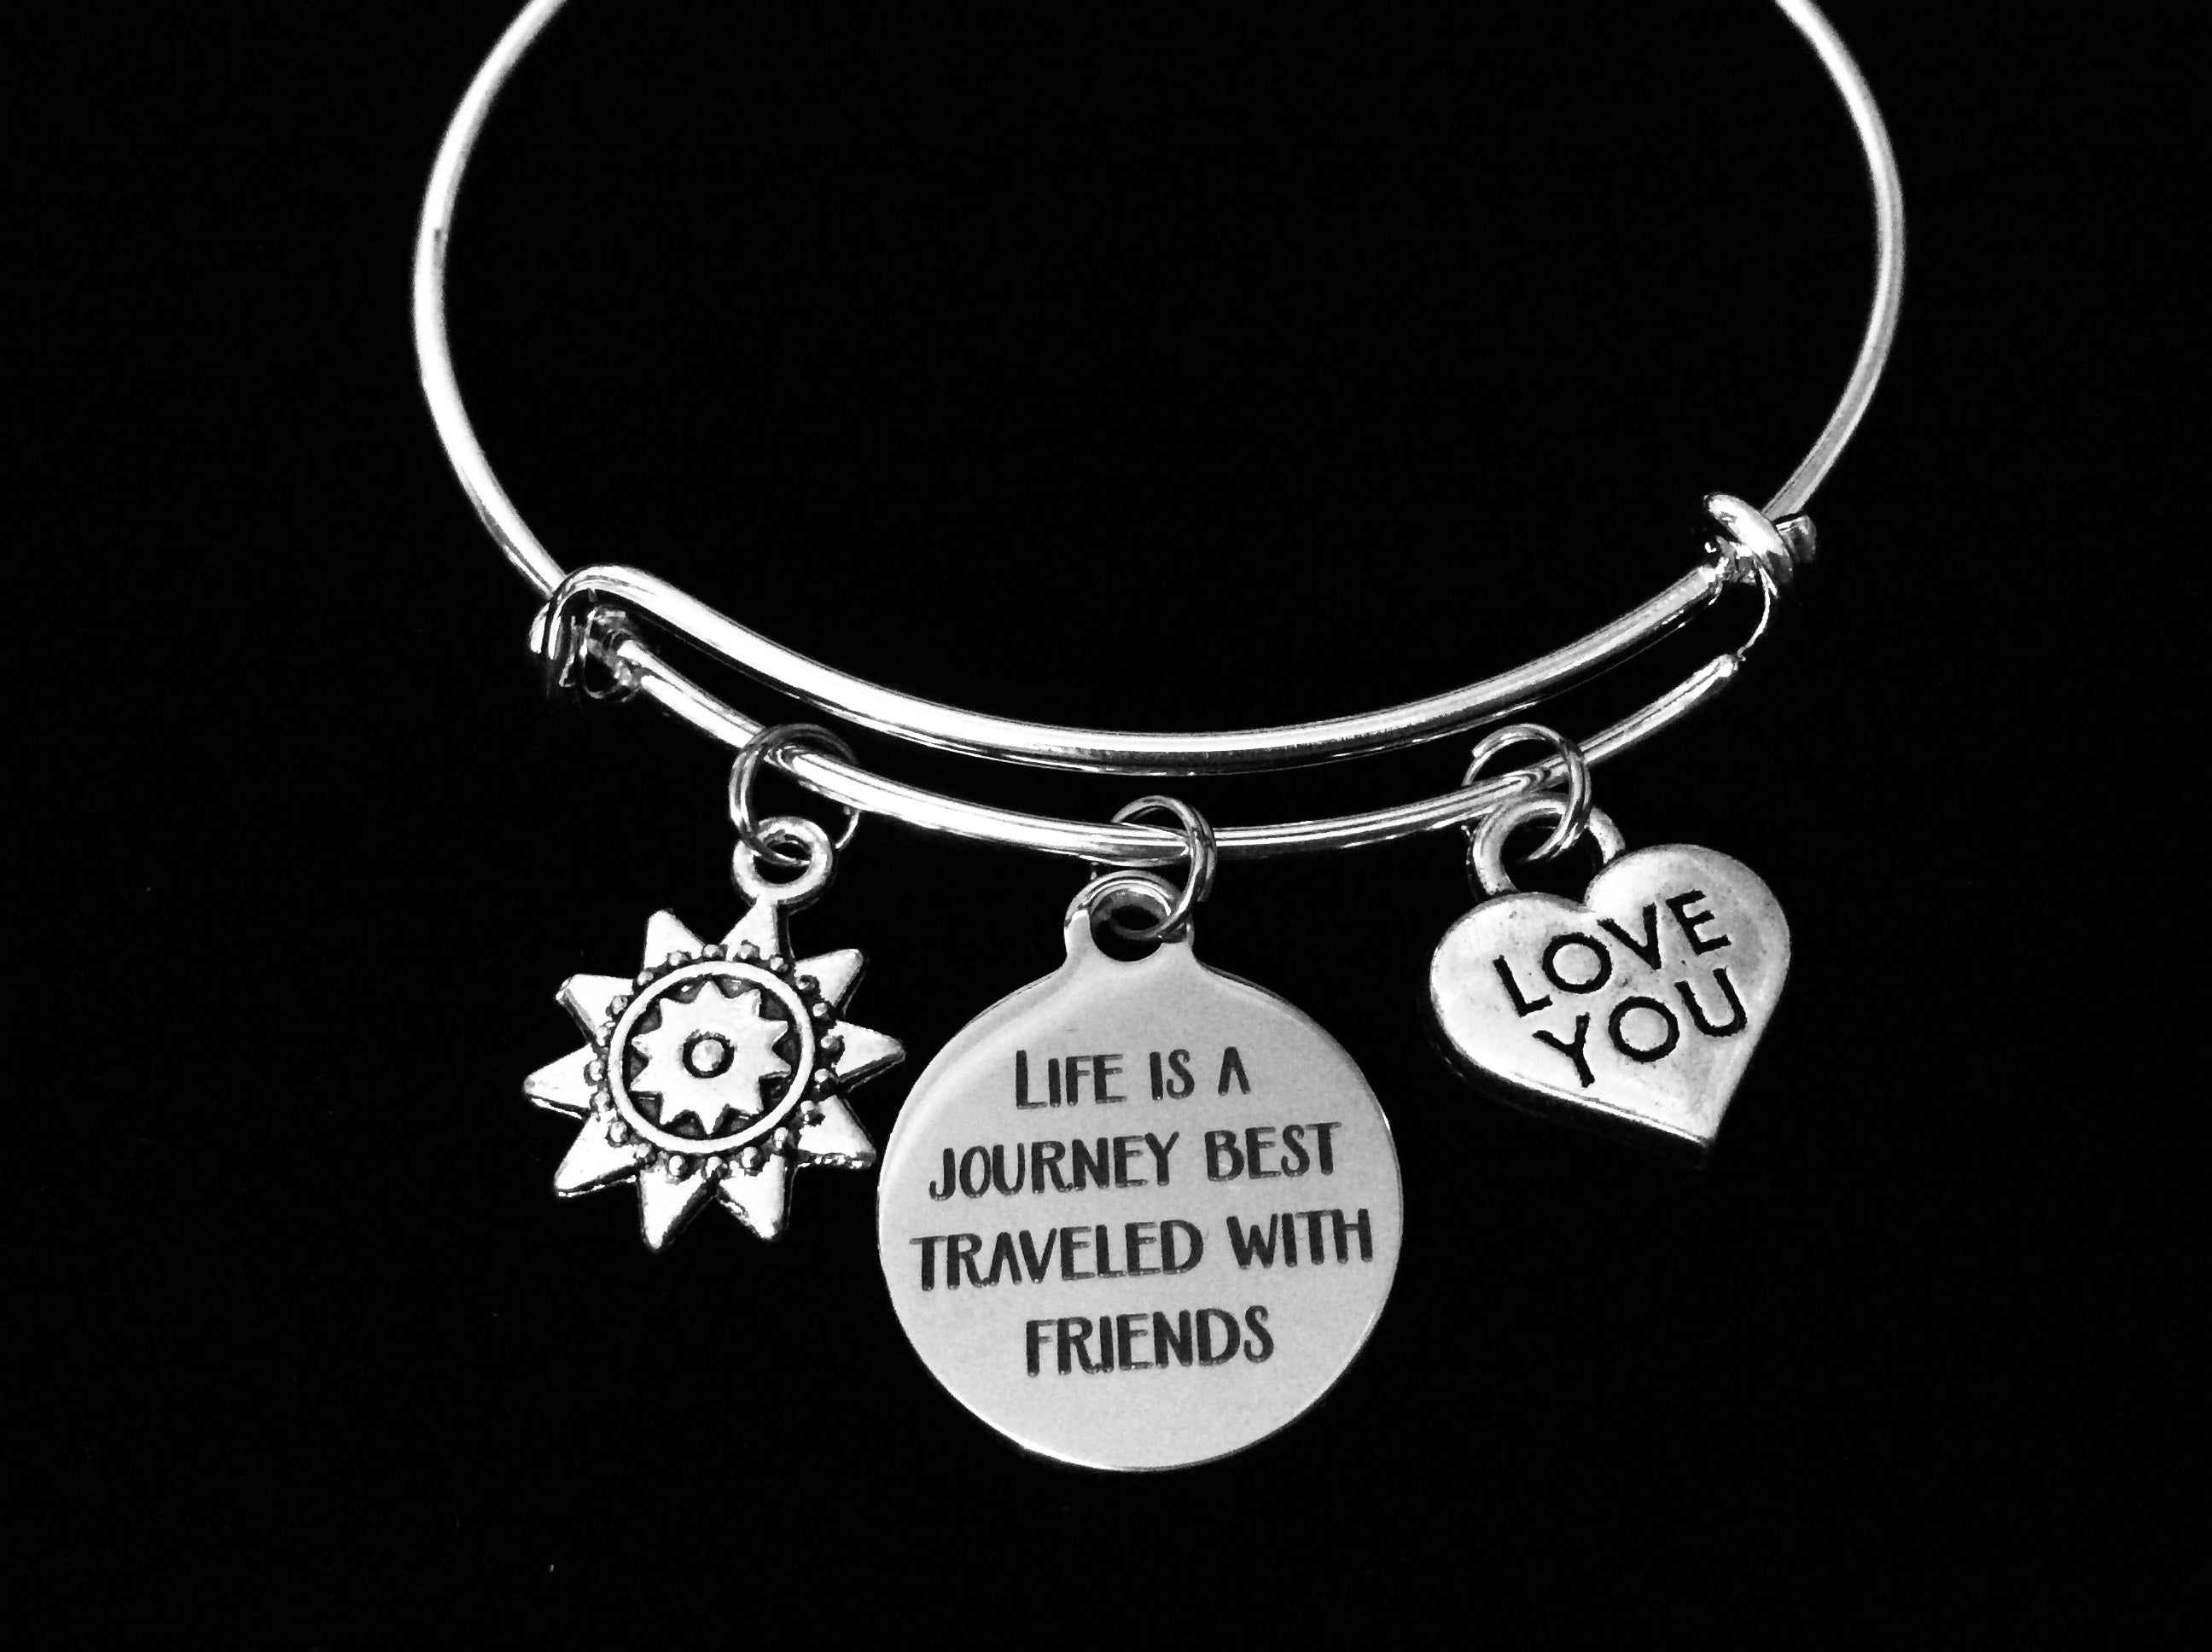 Life is a Journey Best Traveled With Friends Expandable Charm Bracelet Silver Adjustable Silver Wire